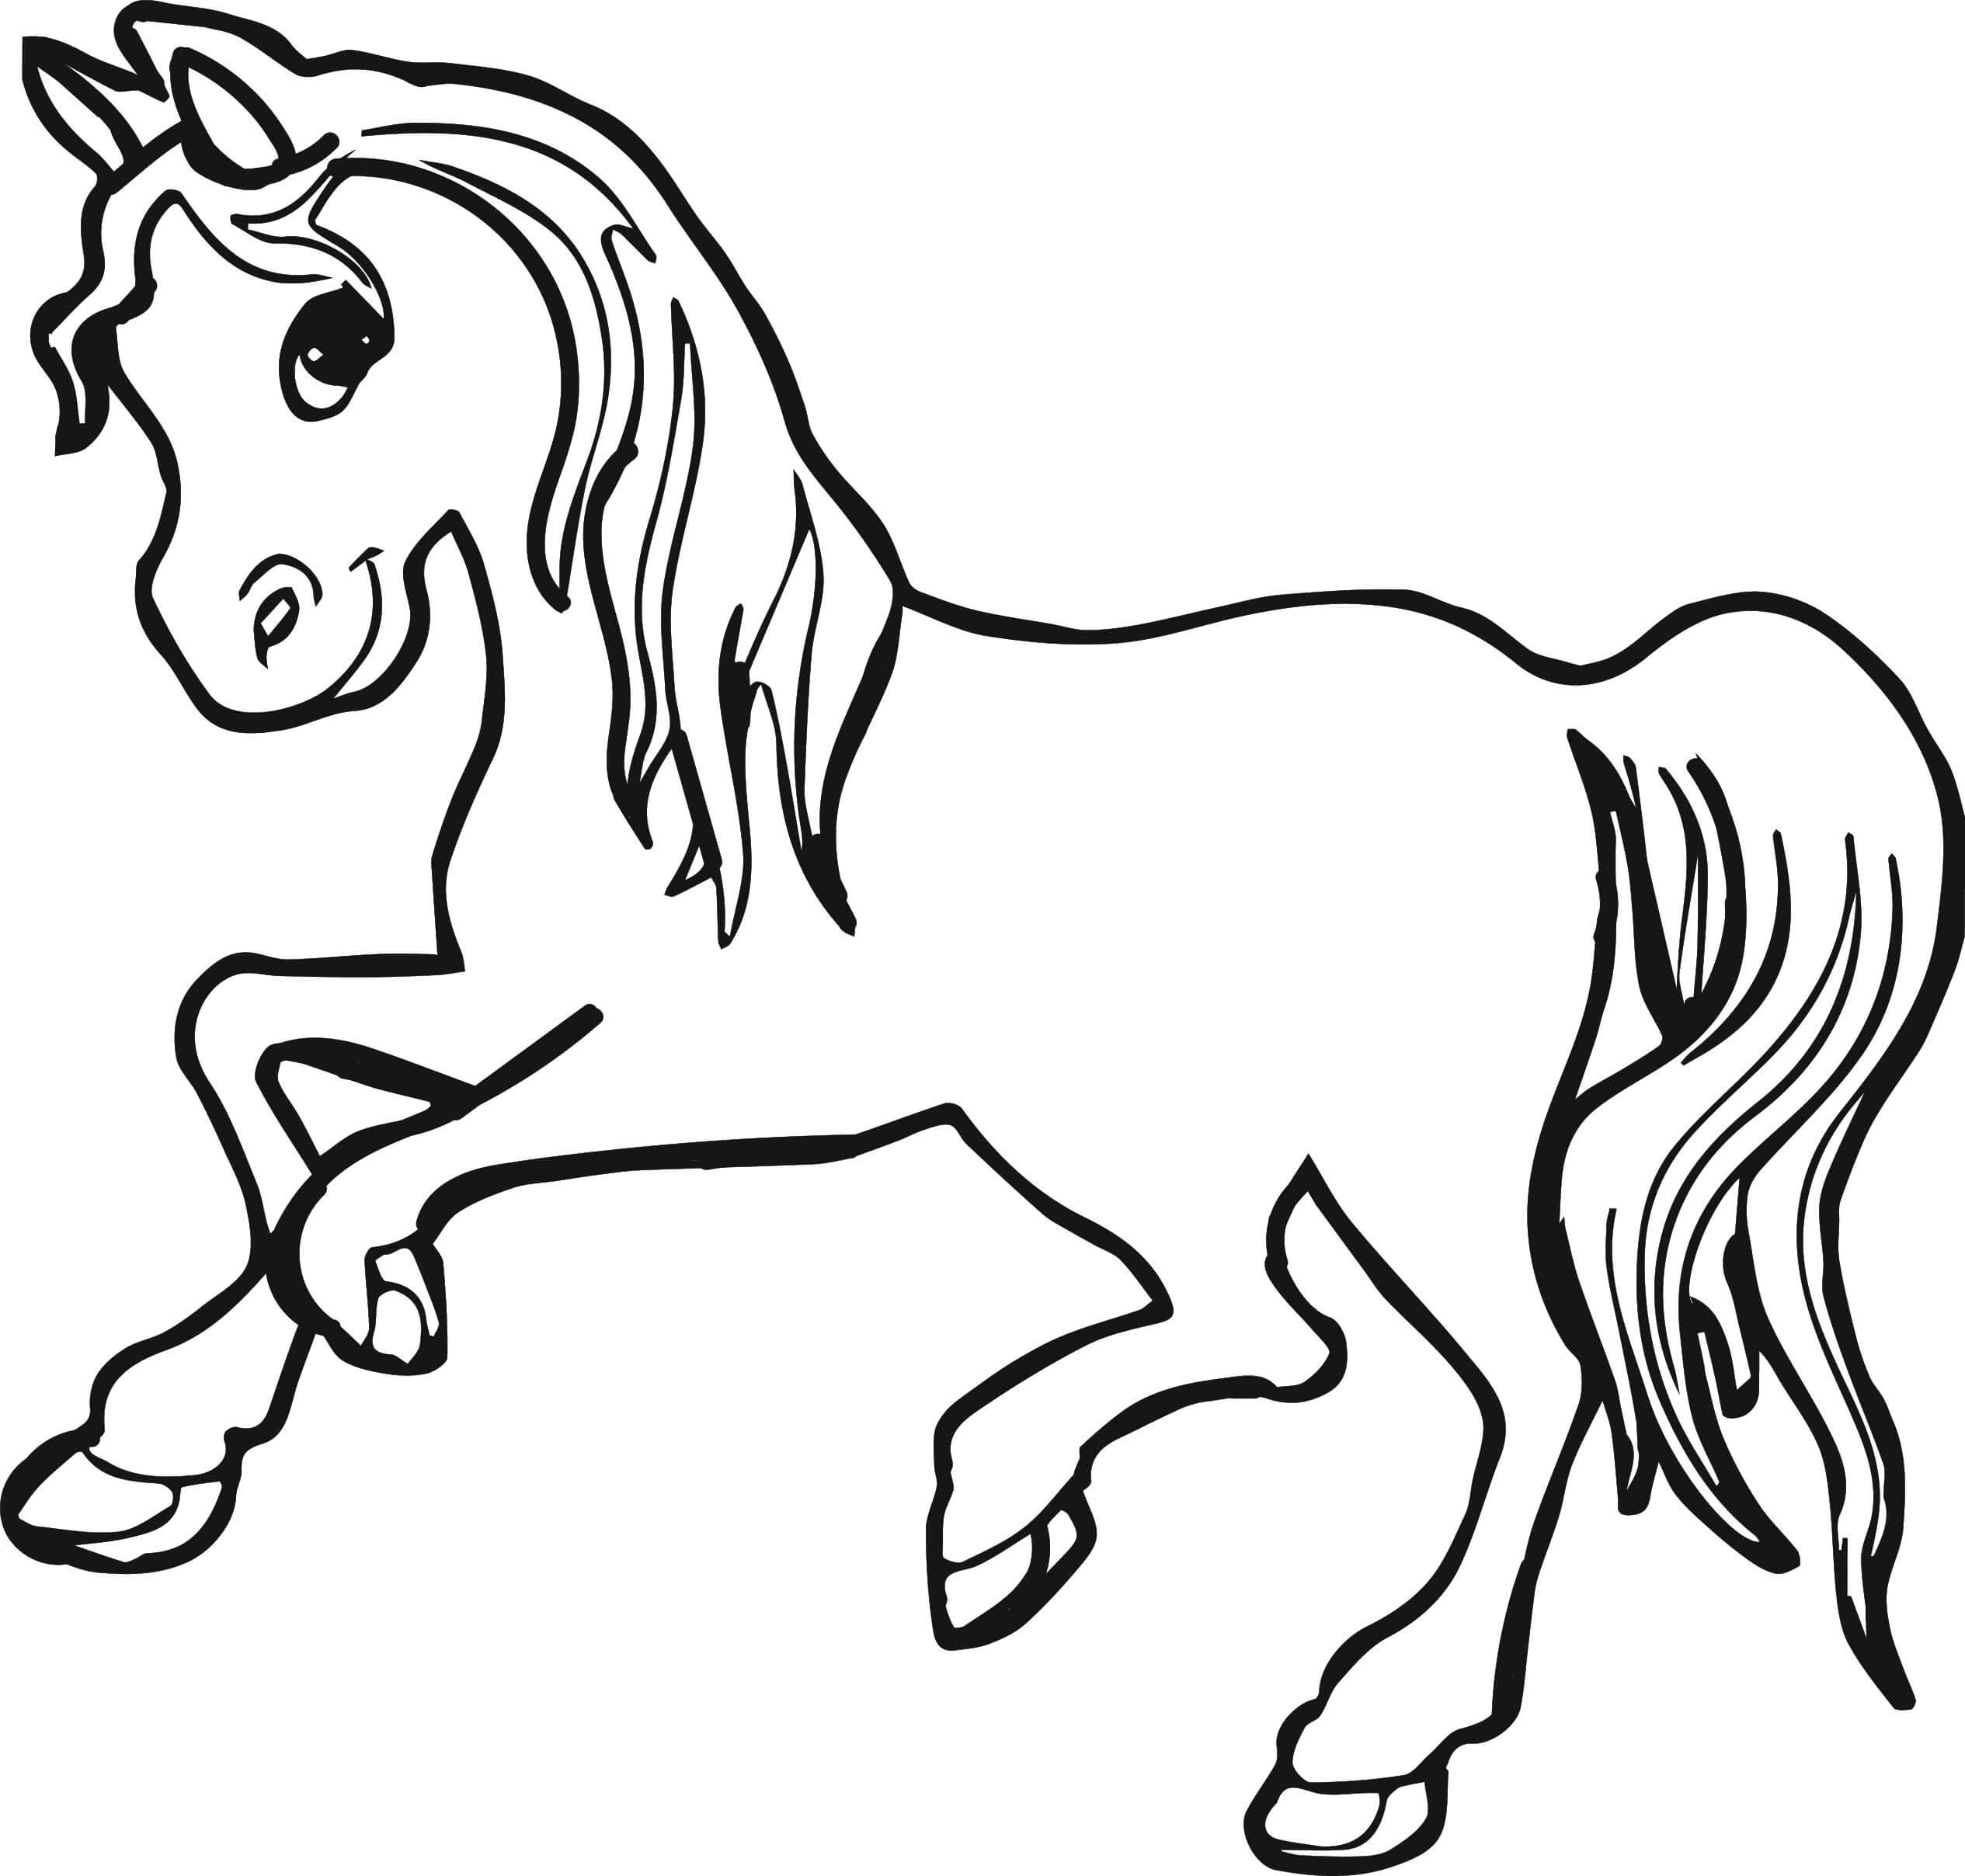 Easy Pony Coloring Pages for Preschoolers